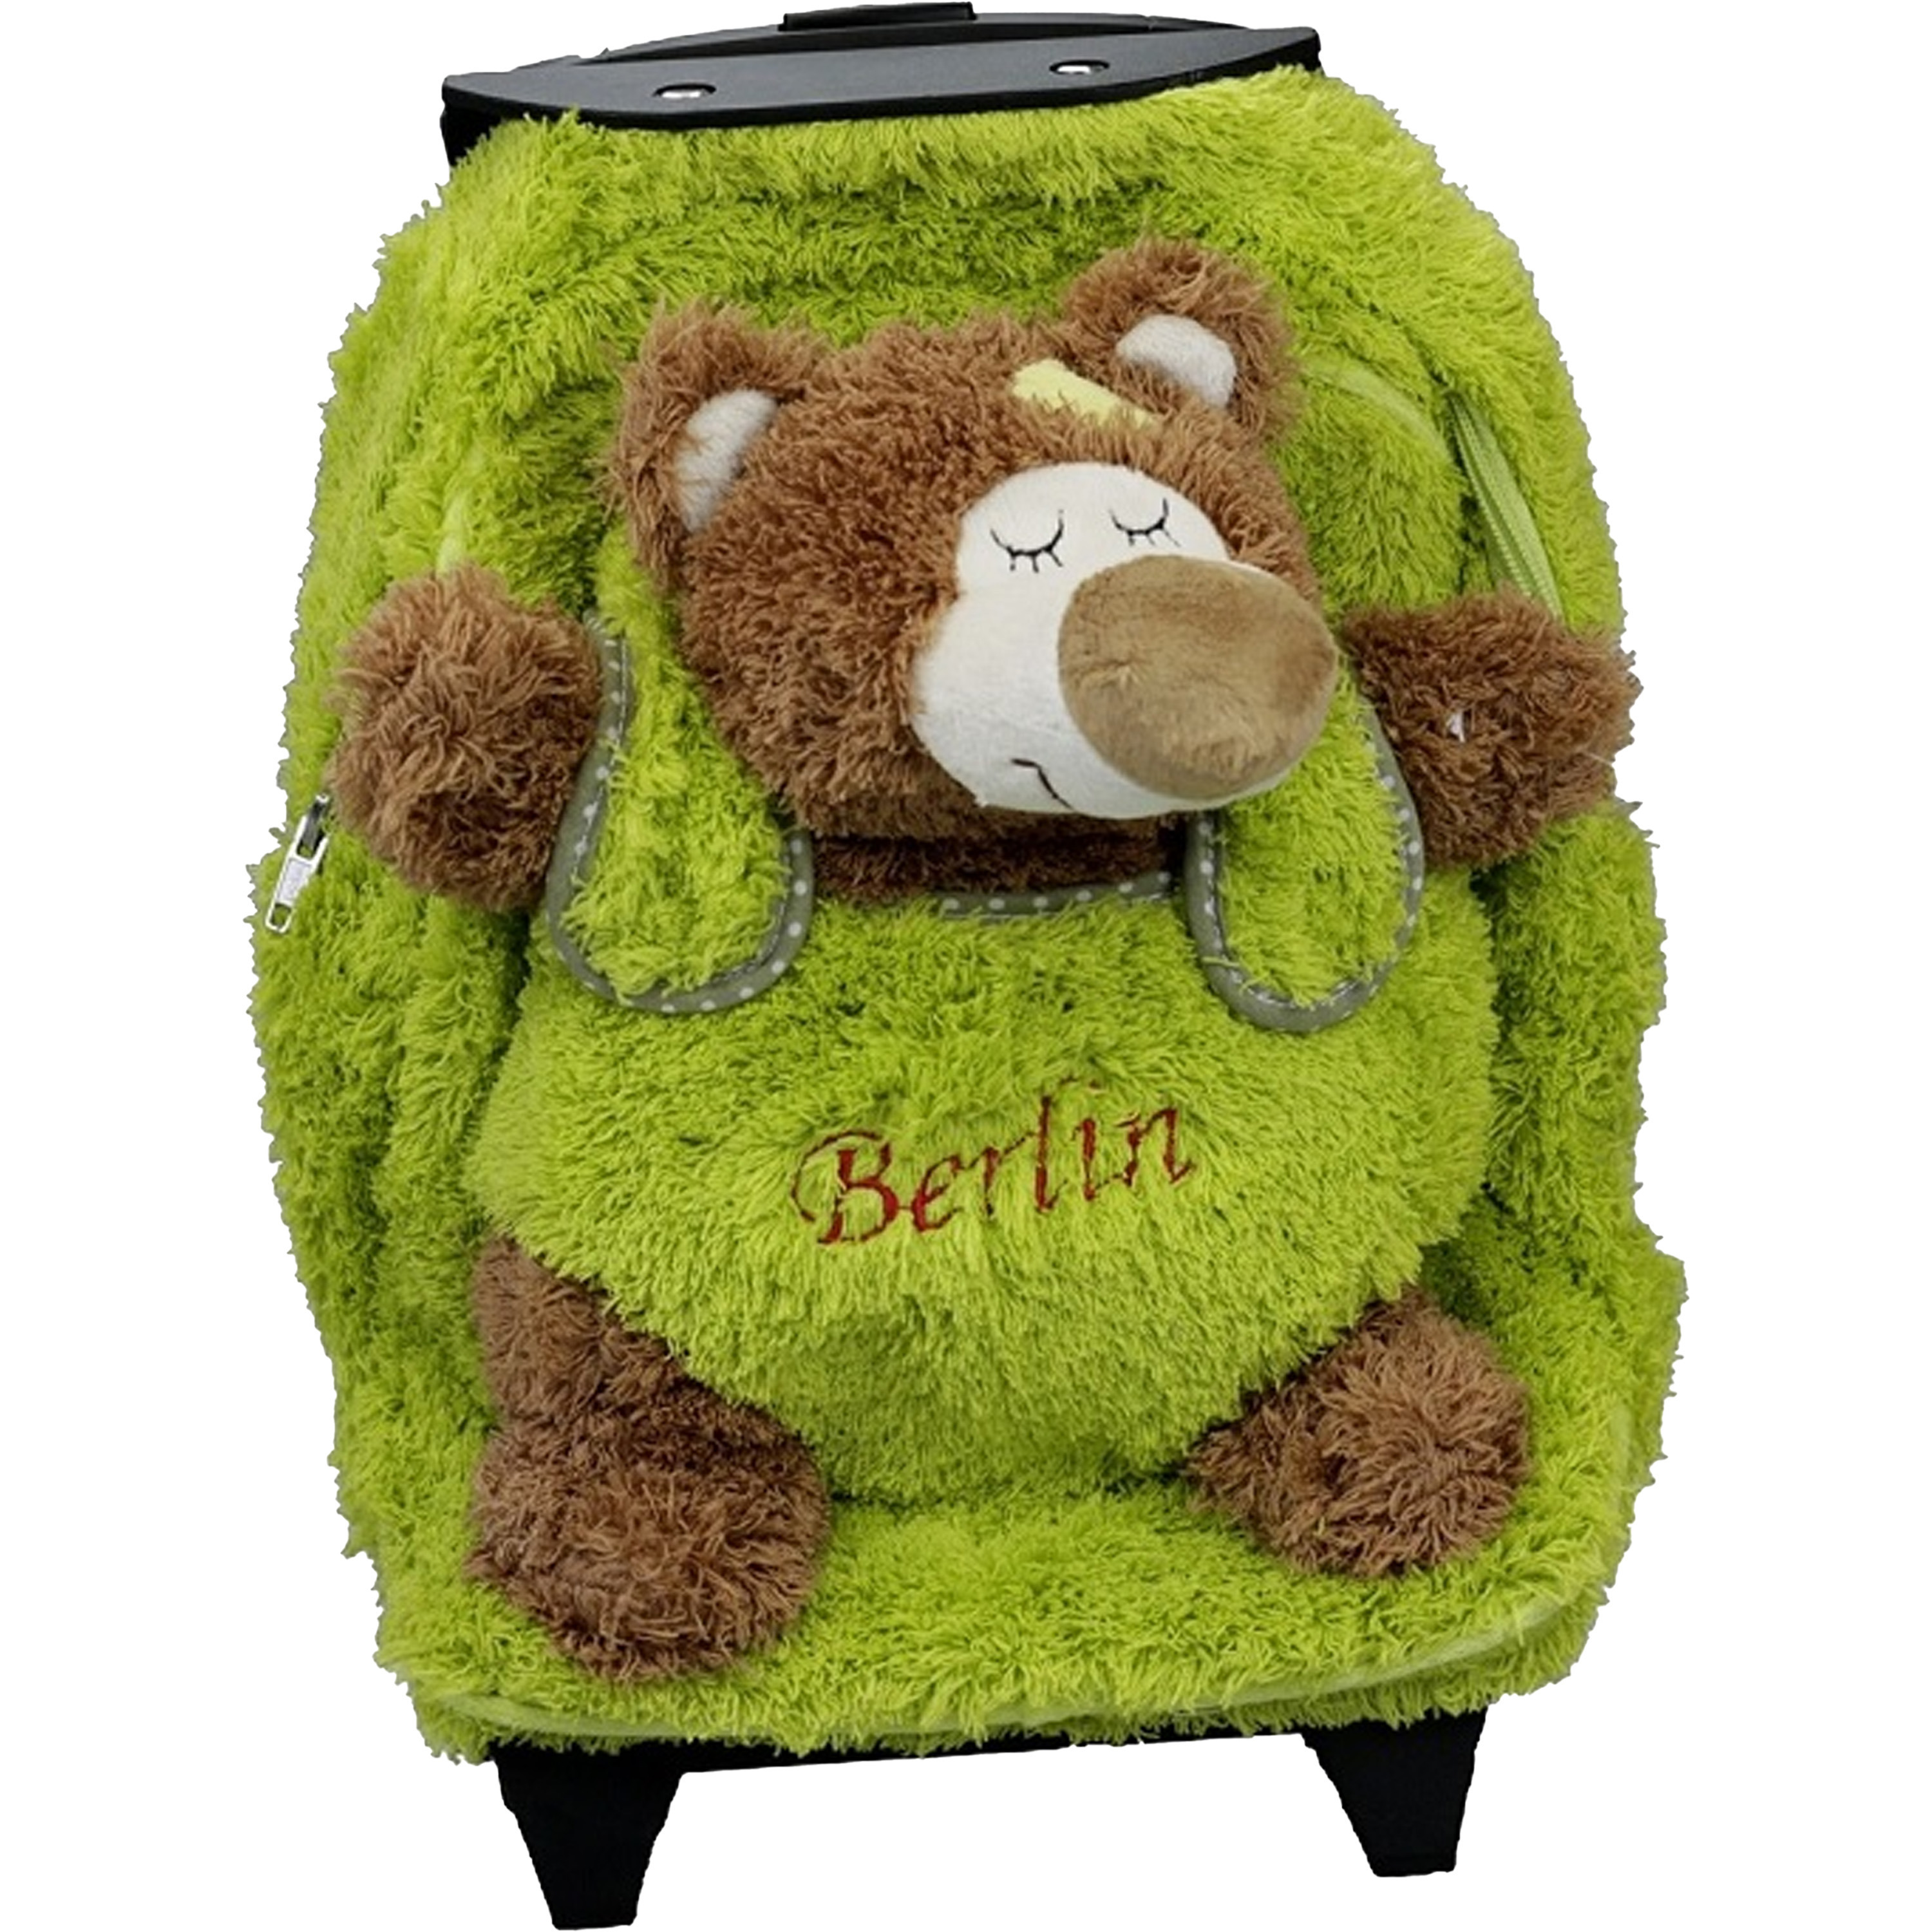 Rugzaktrolley kinderkoffer pluche beer knuffel kunststof-polyester 35 x 25 x 13 cm